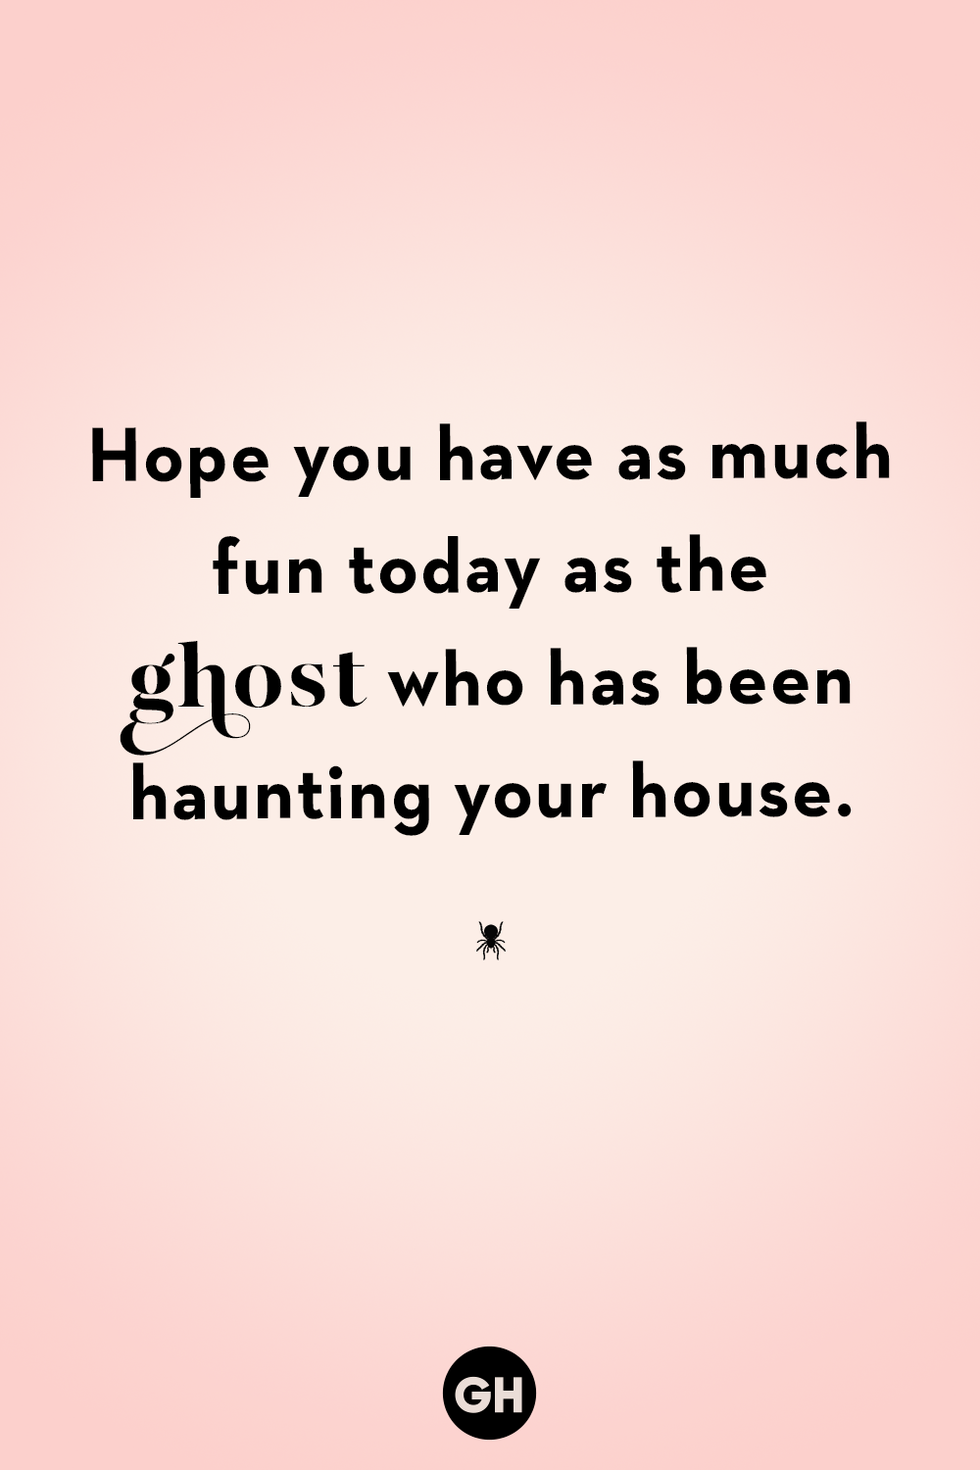 45 Best Halloween Wishes for 2022, Including Cute & Fun Messages